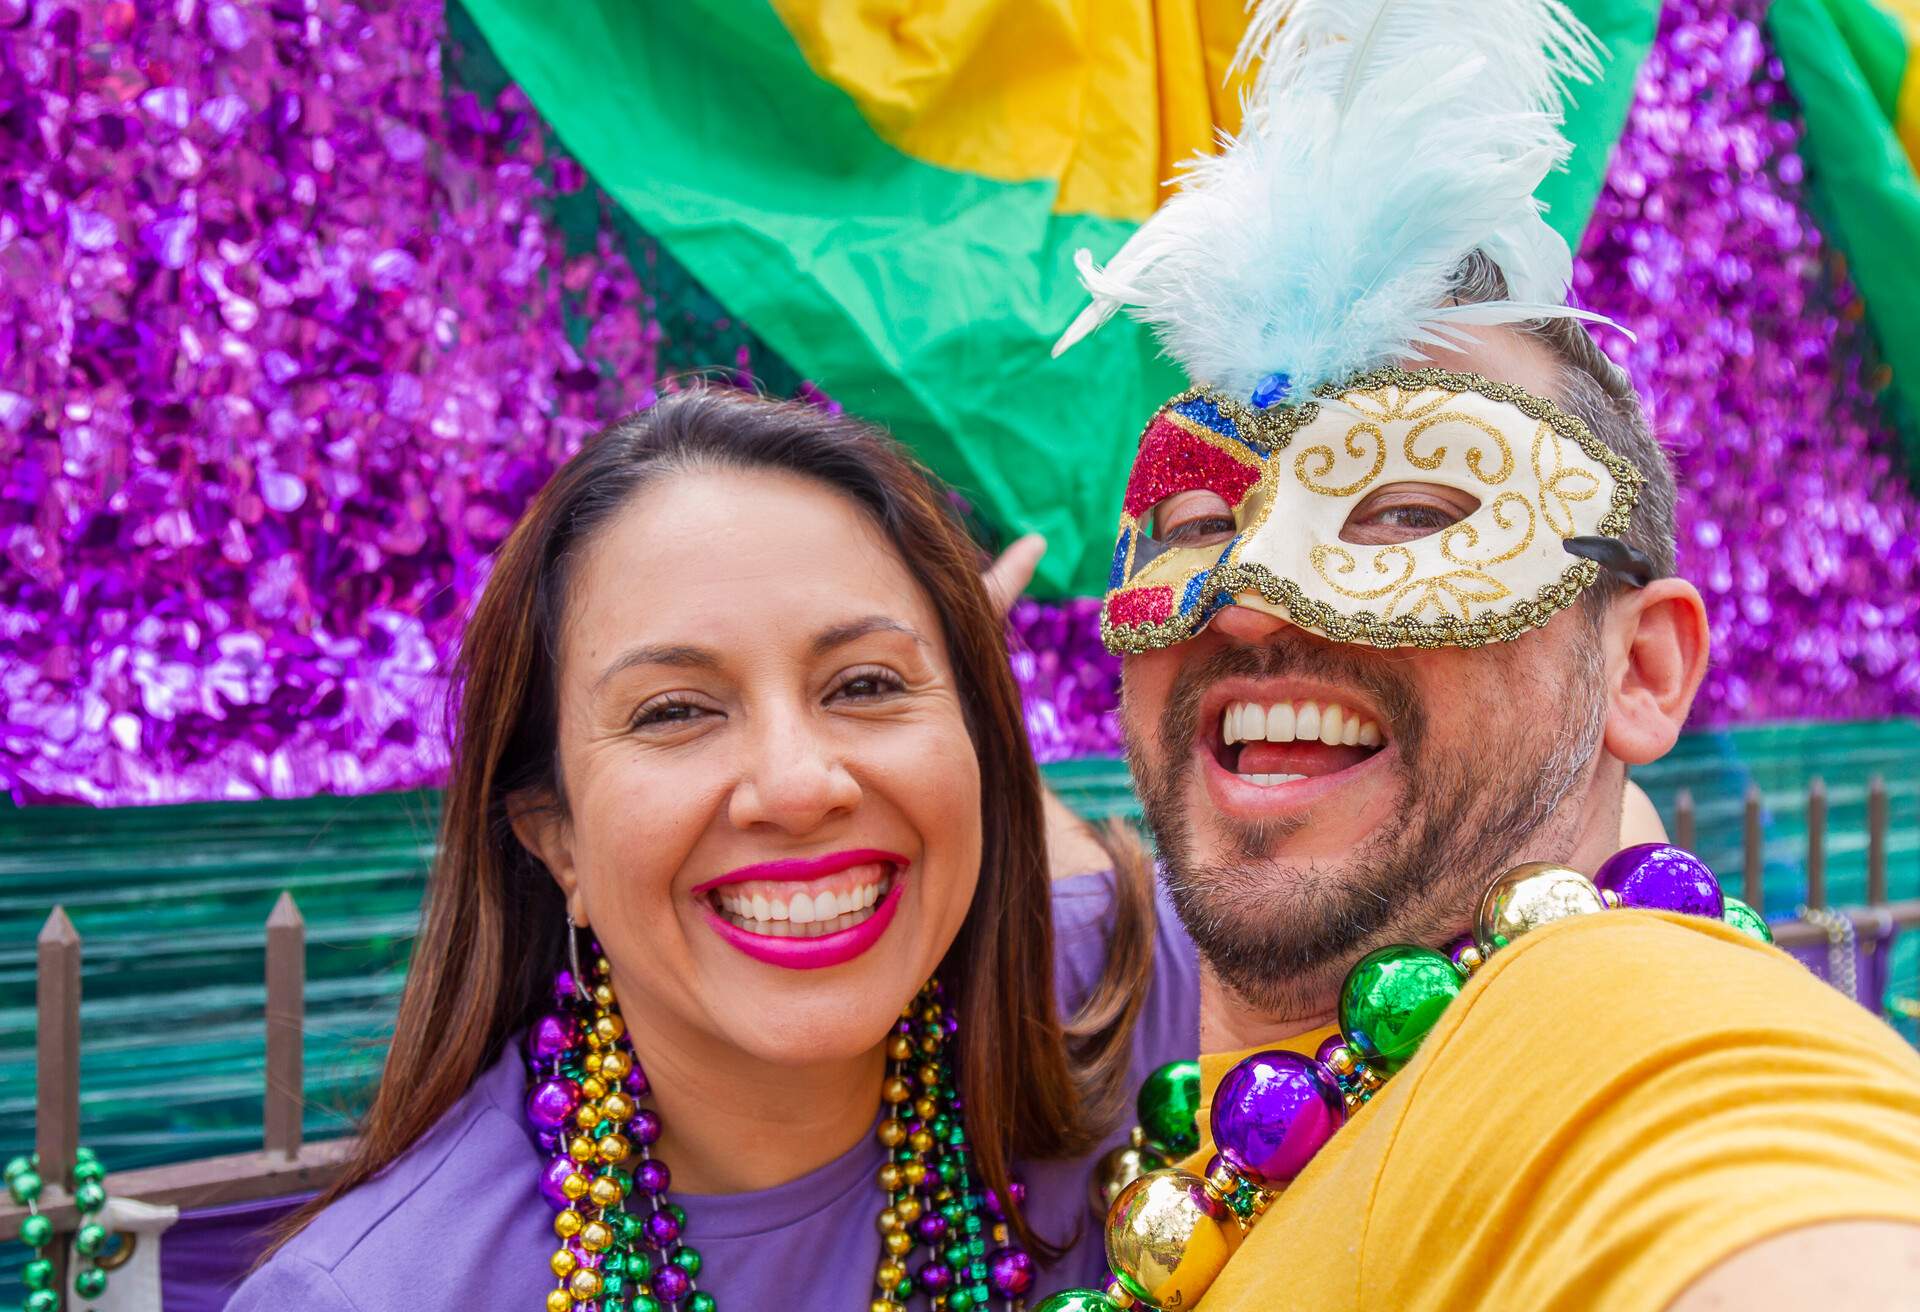 Happy latin tourists friends / heterosexual couple celebrating their Honeymoon in Mardi Gras in New Orleans dressing necklace and masks while taking a selfie. Mardi Gras is the most important celebration for the city.